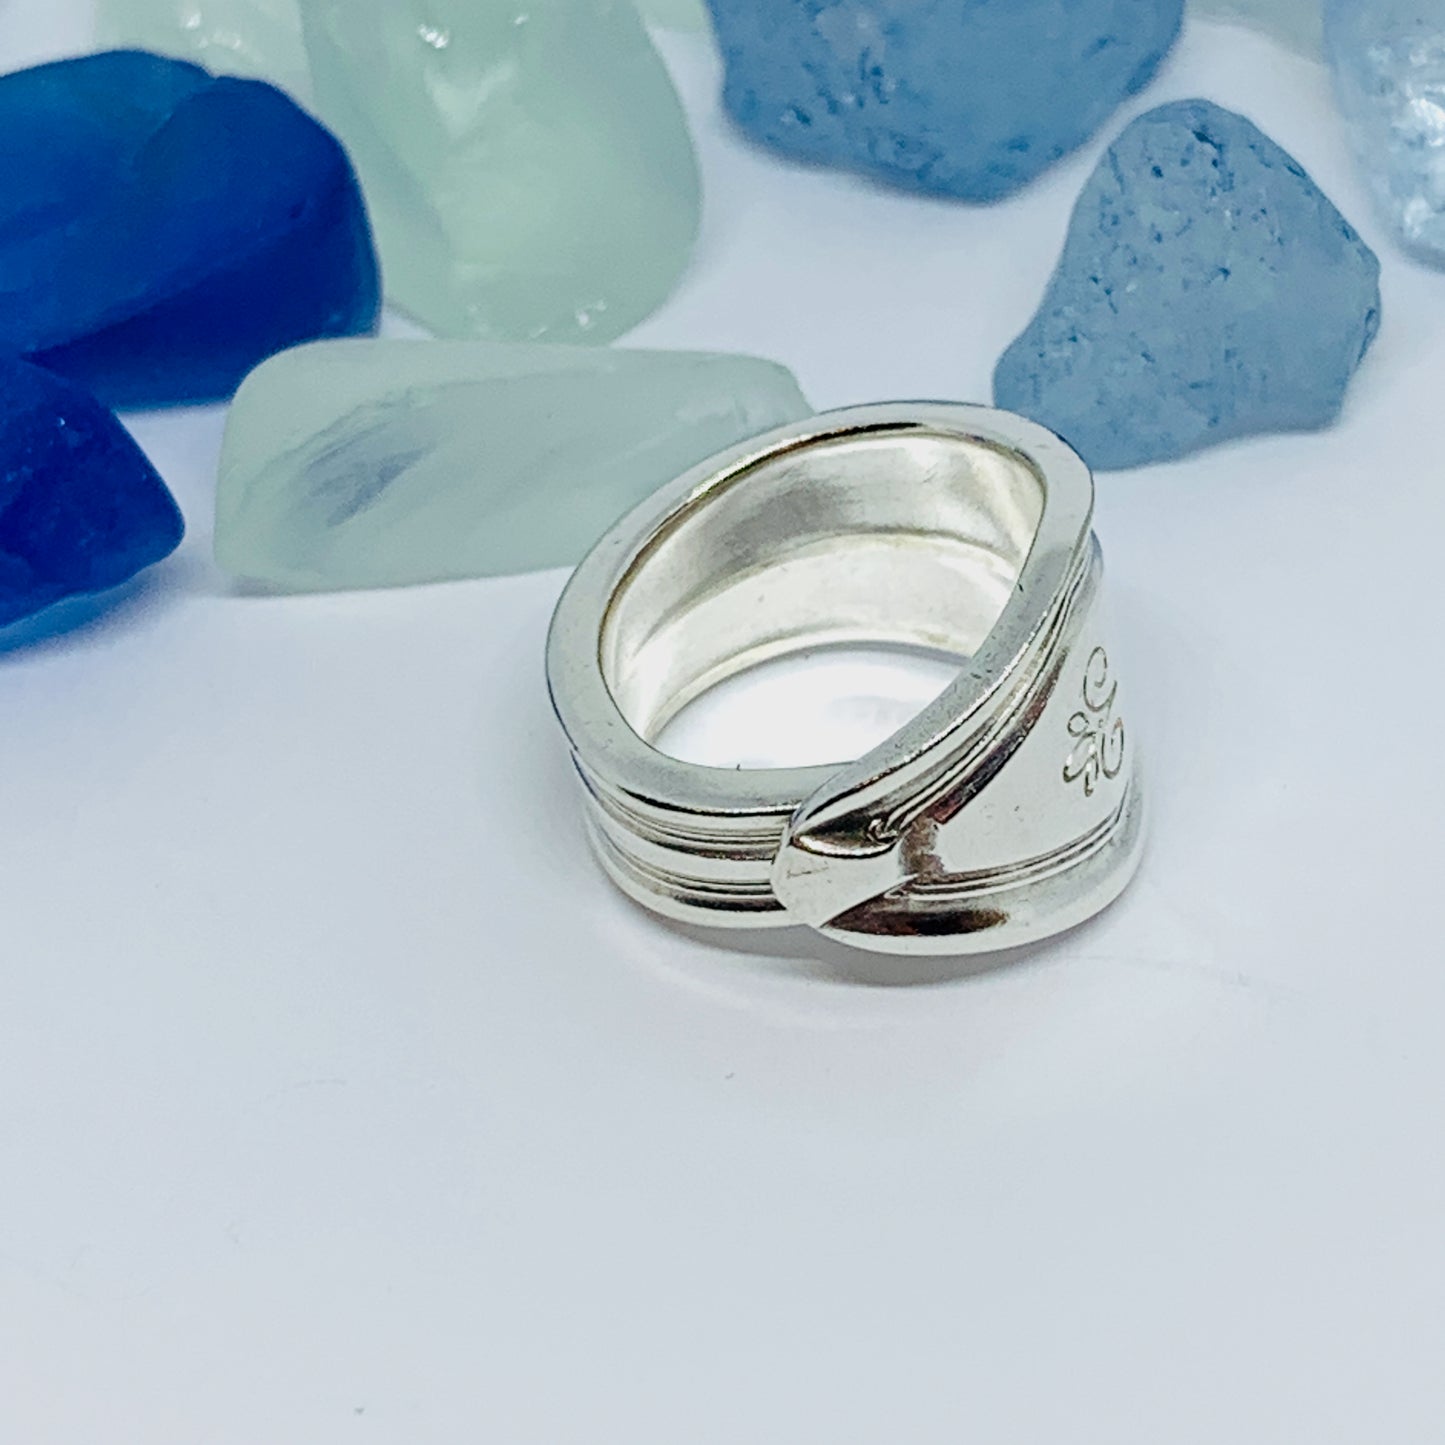 Vintage Spoon Ring with Hand Stamped Flourish